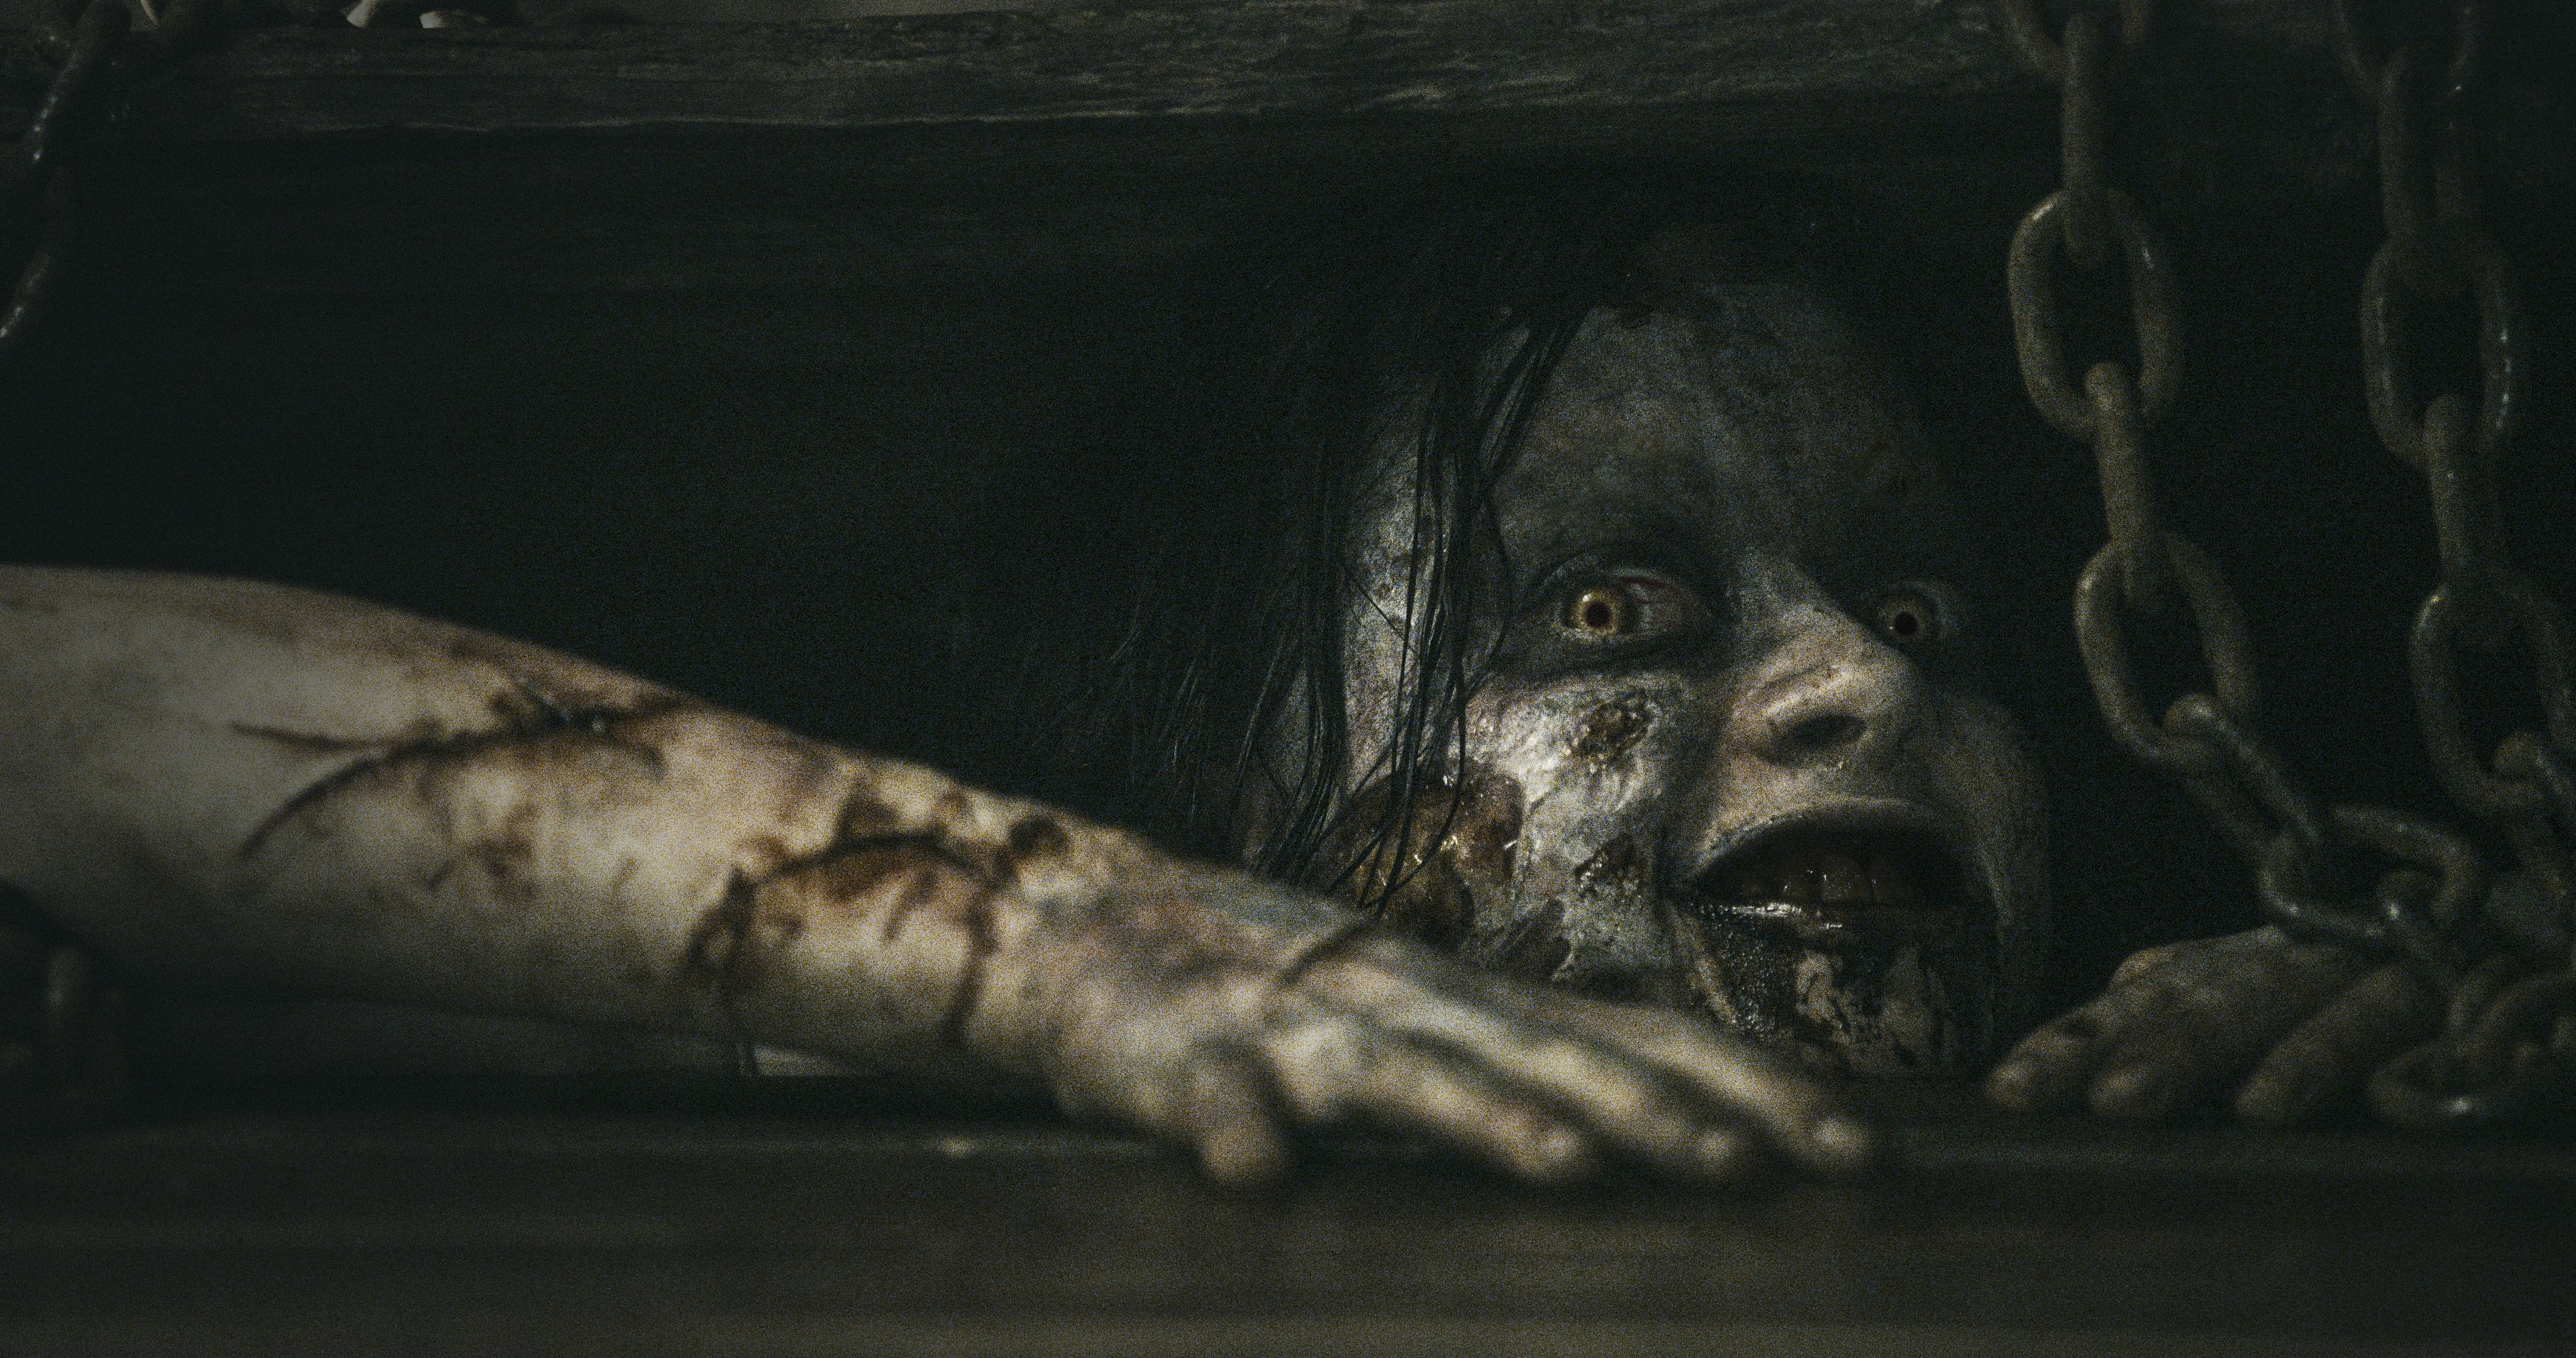 What to Watch Before 'Evil Dead Rise' — Is the New Movie a Sequel?